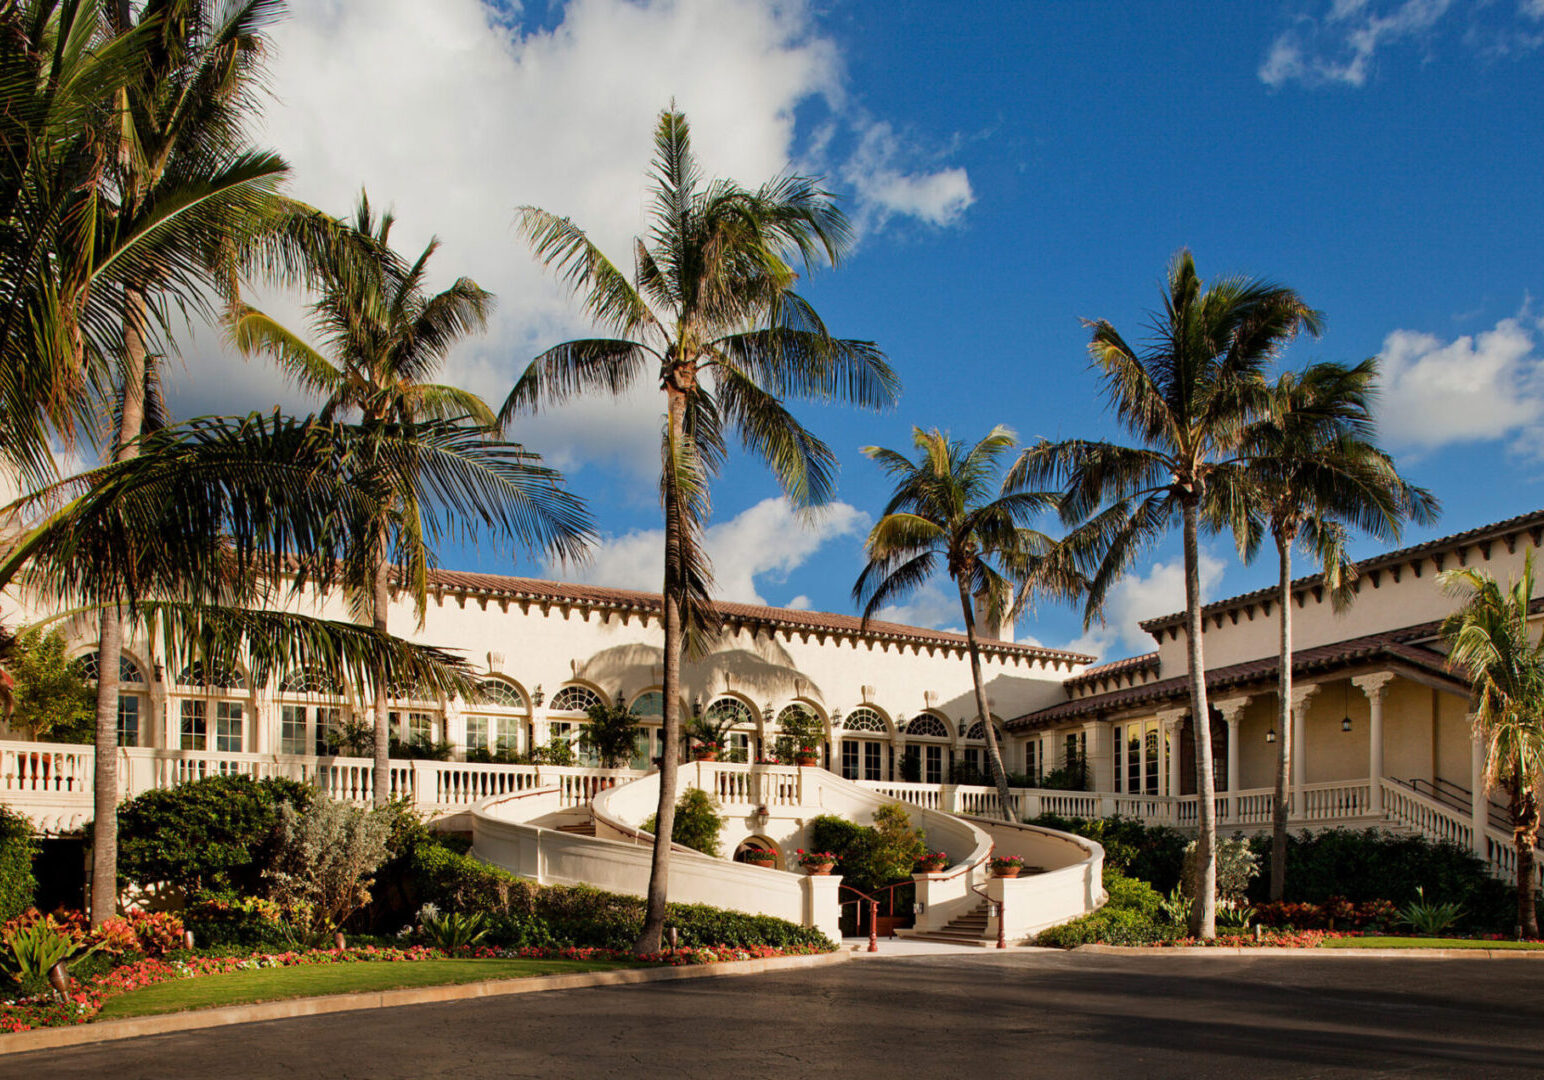 A large white building with palm trees in front of it.